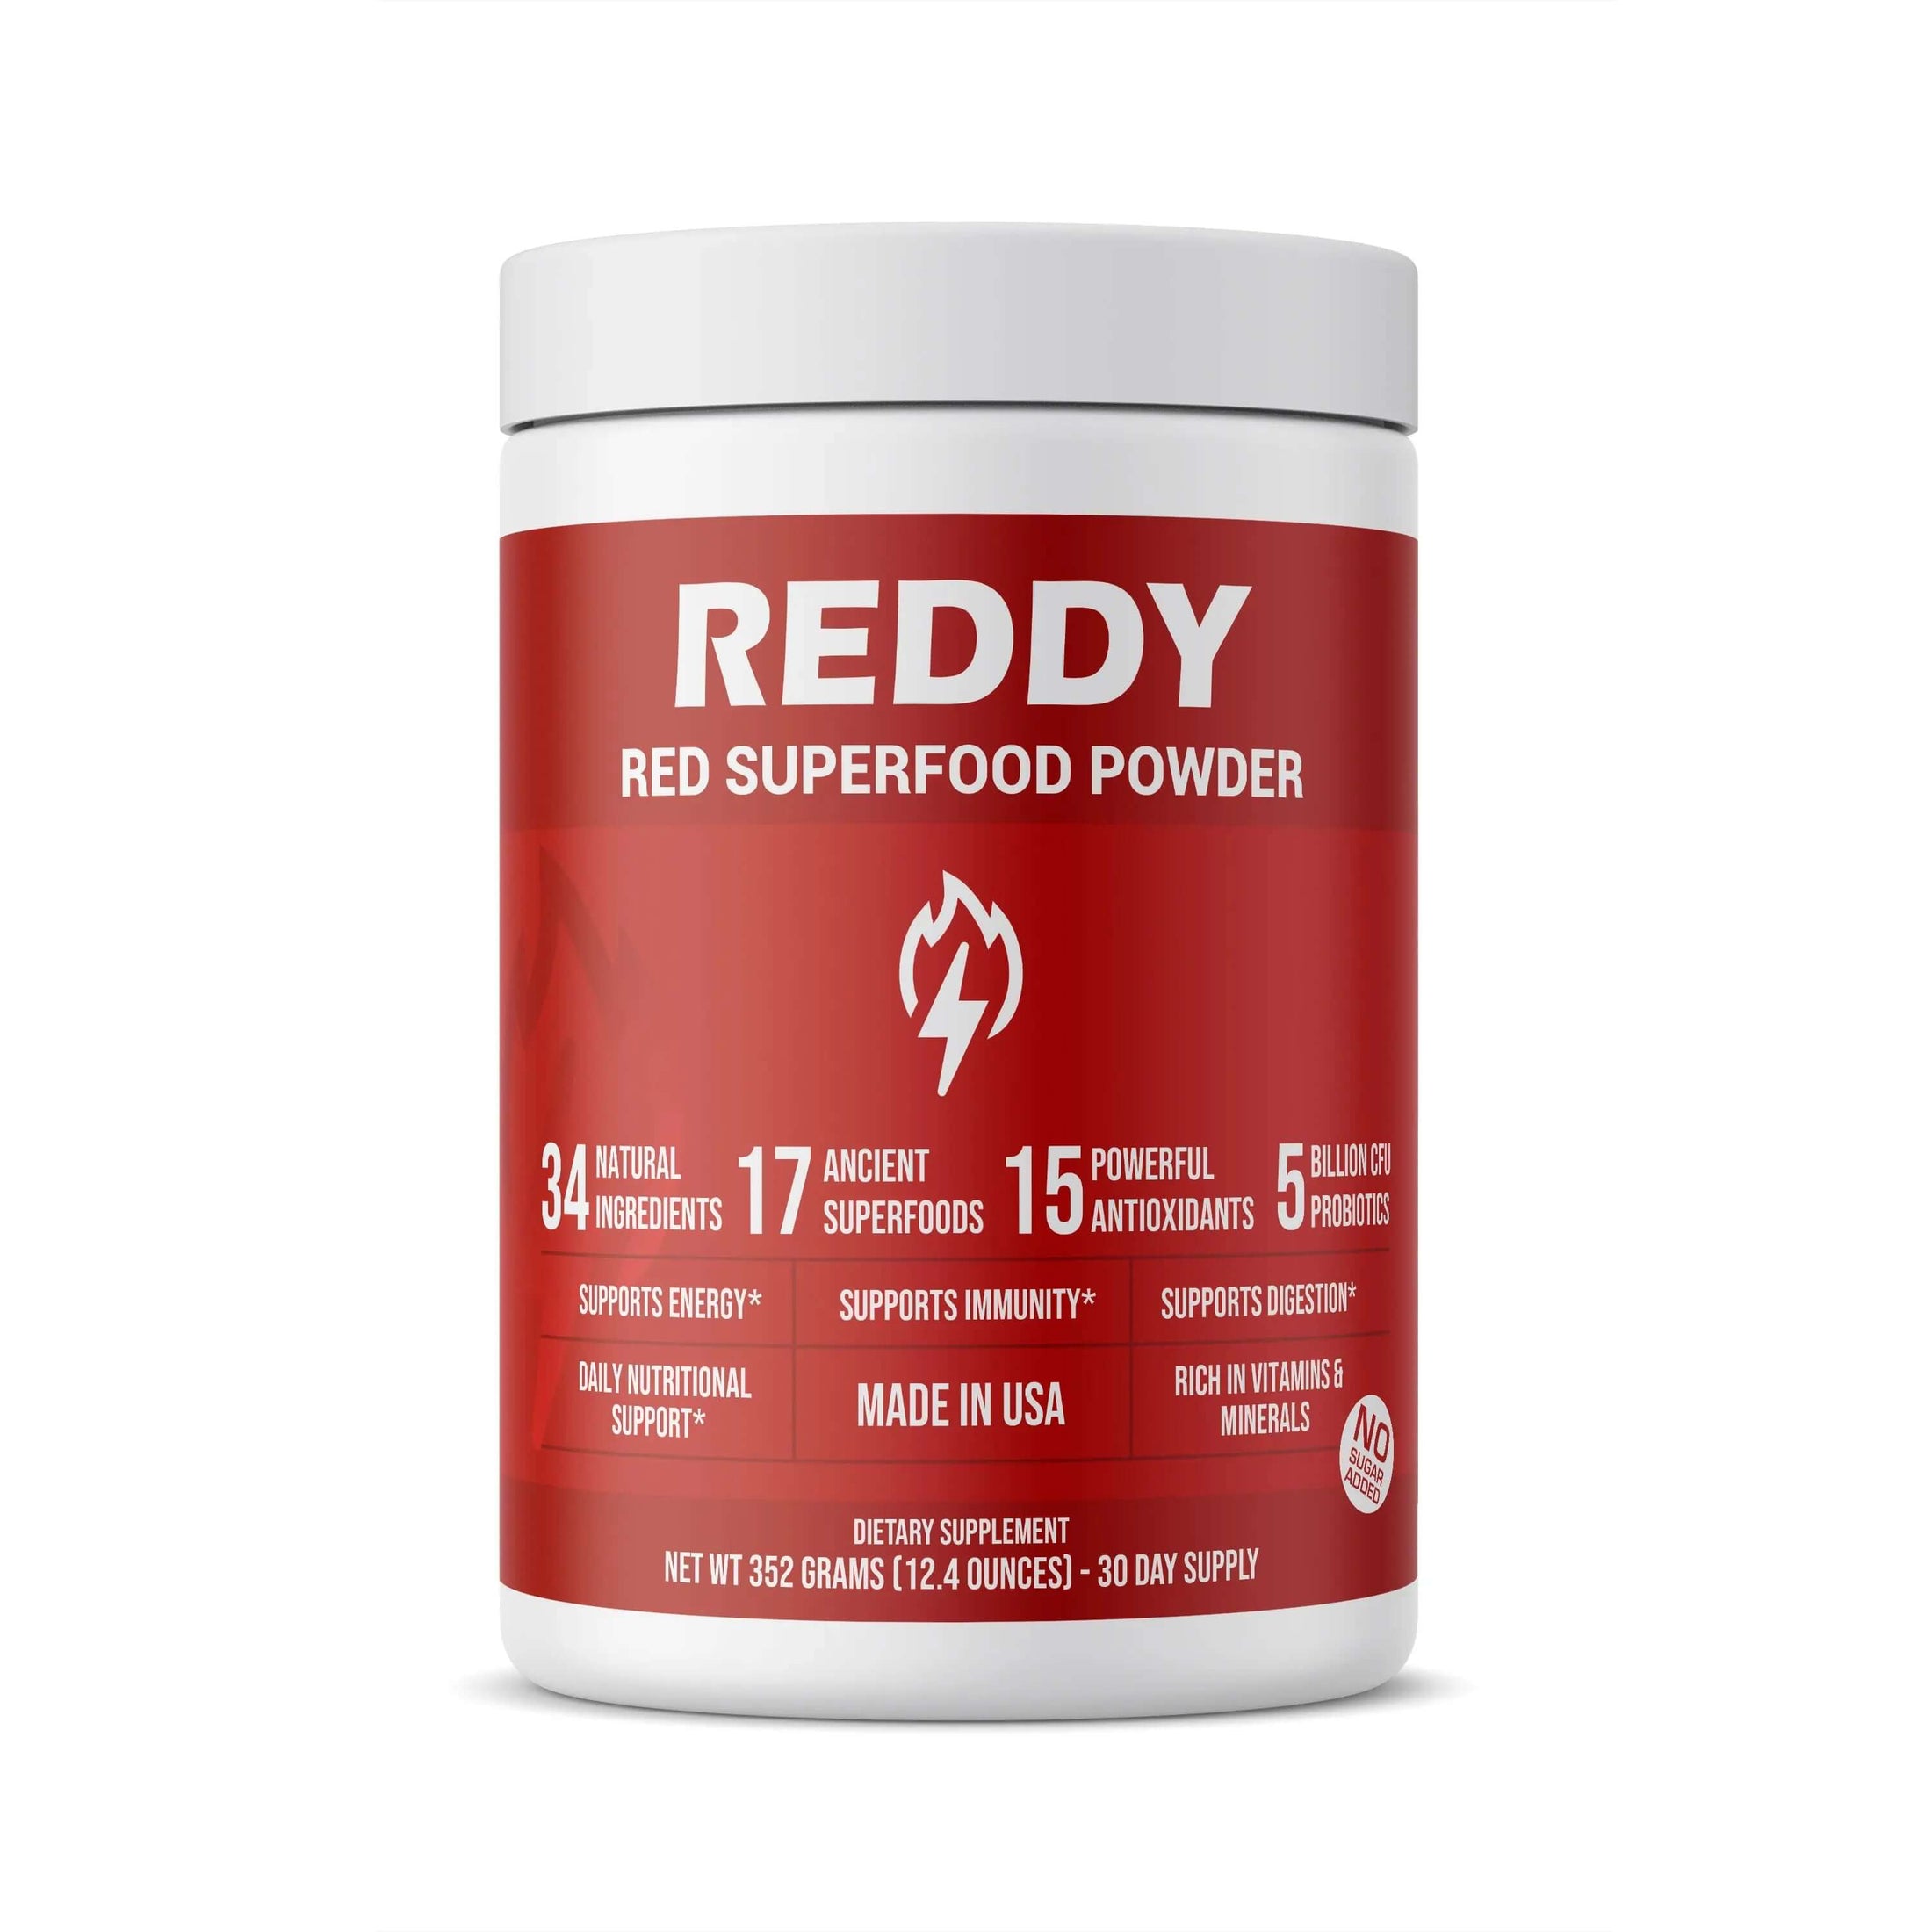 Elegant design of Reddy Red Organic Superfood Powder packaging, emphasizing eco-friendly materials and clear, informative labeling.